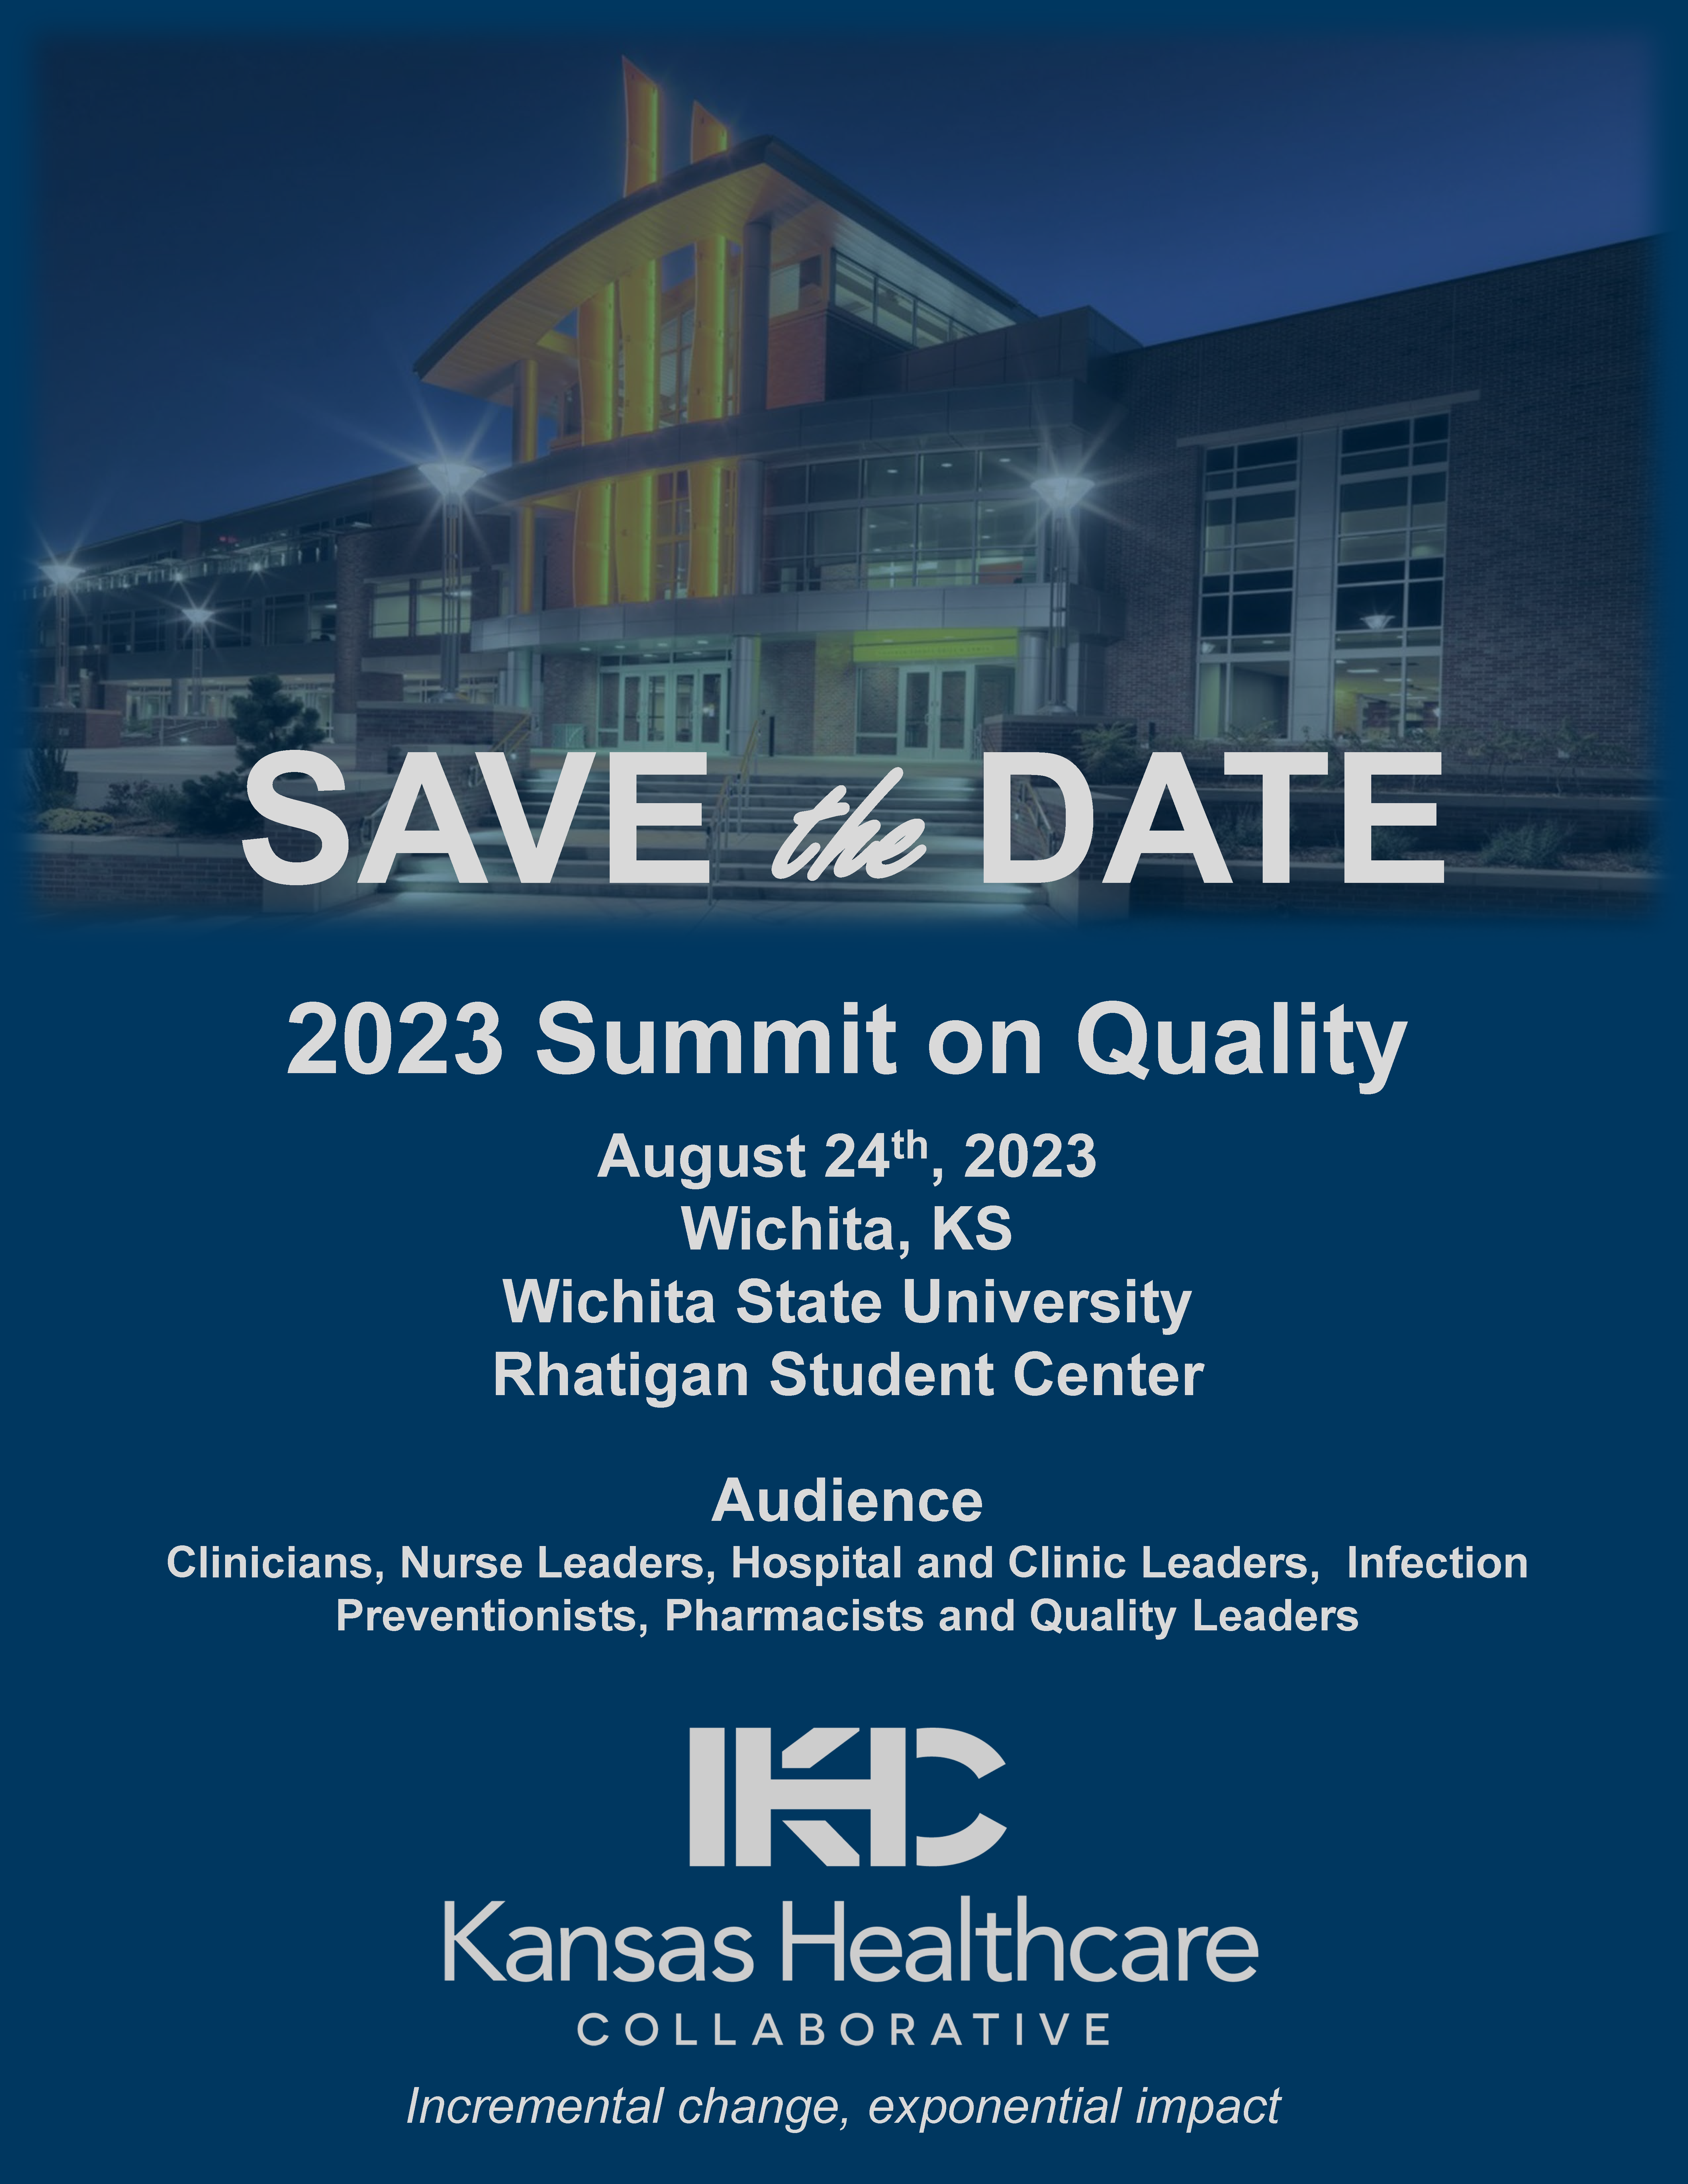 Update: Summit on Quality 2023